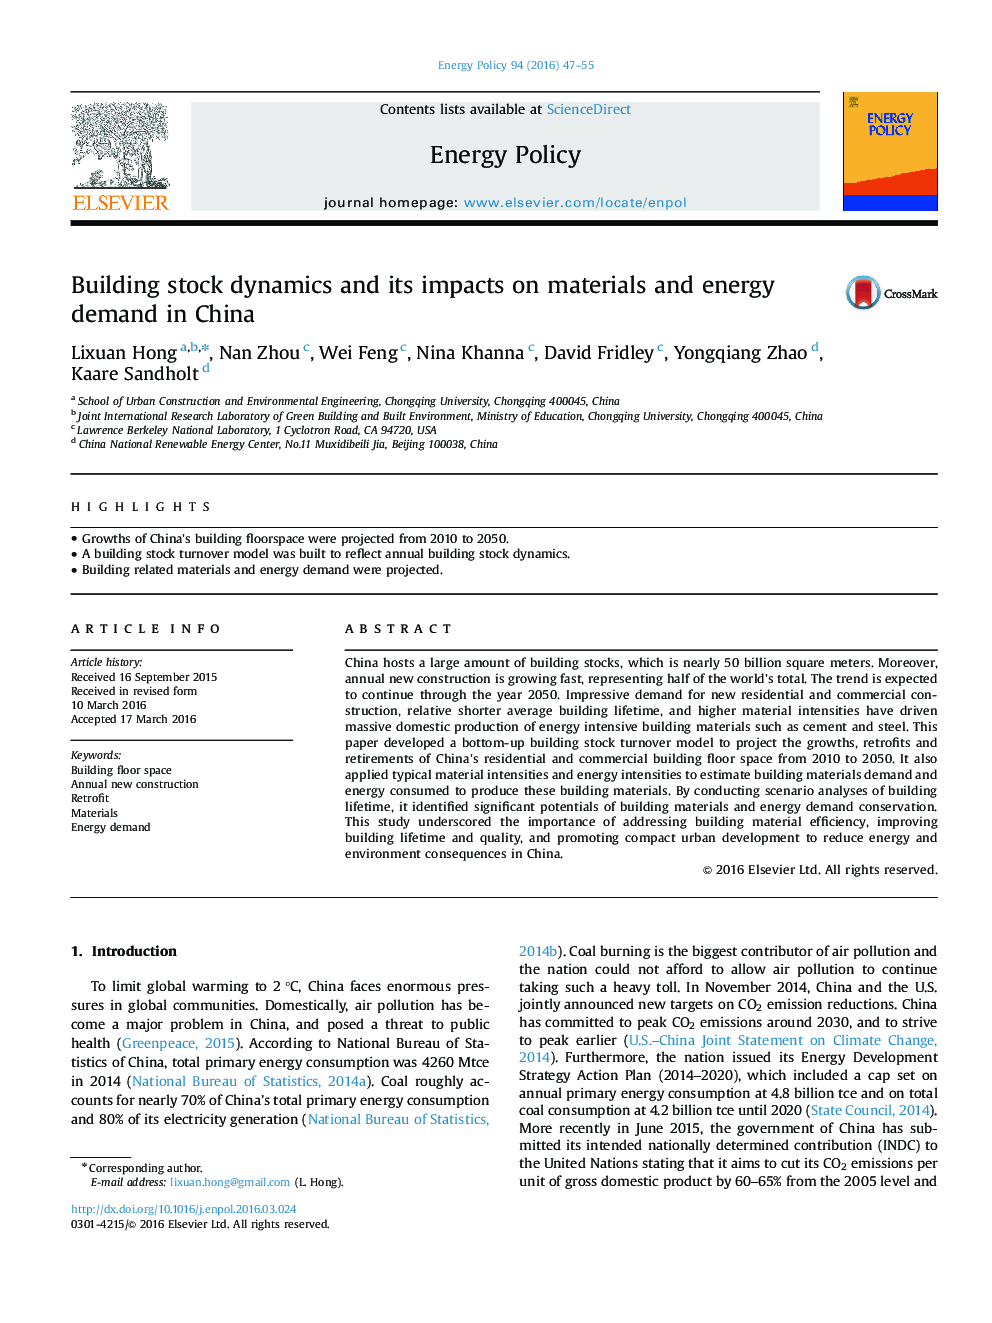 Building stock dynamics and its impacts on materials and energy demand in China